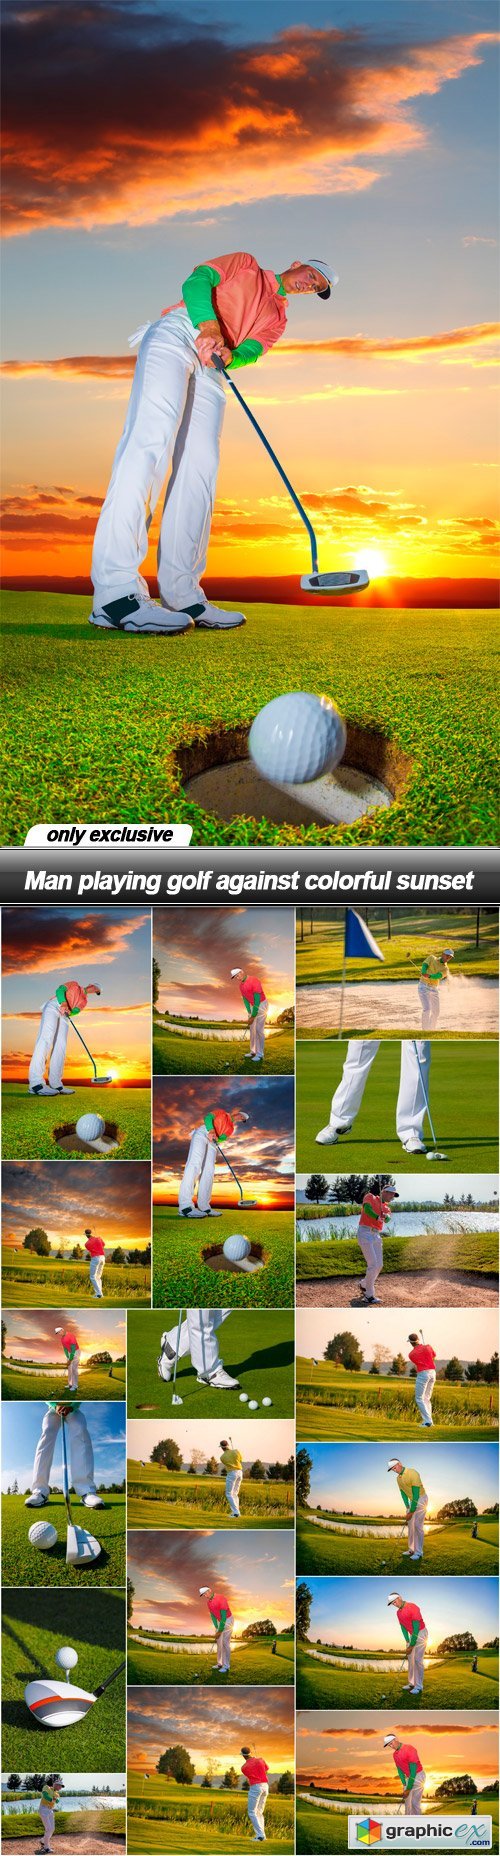 Man playing golf against colorful sunset - 19 UHQ JPEG